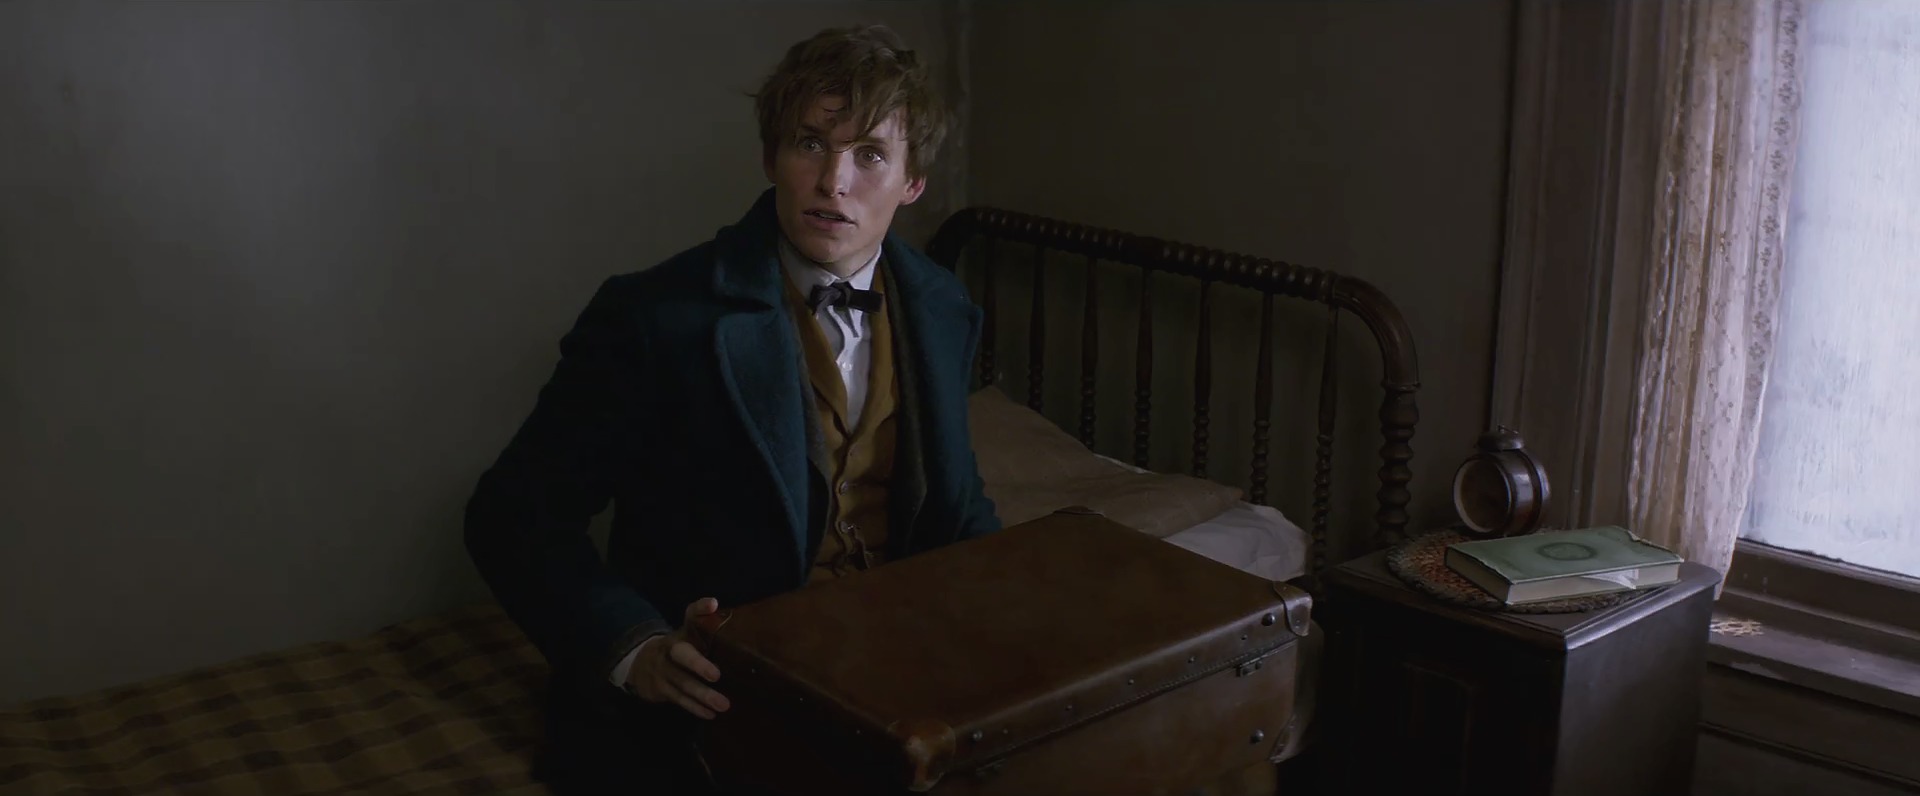 Fantastic Beasts And Where To Find Them Watch Online 2016 Film